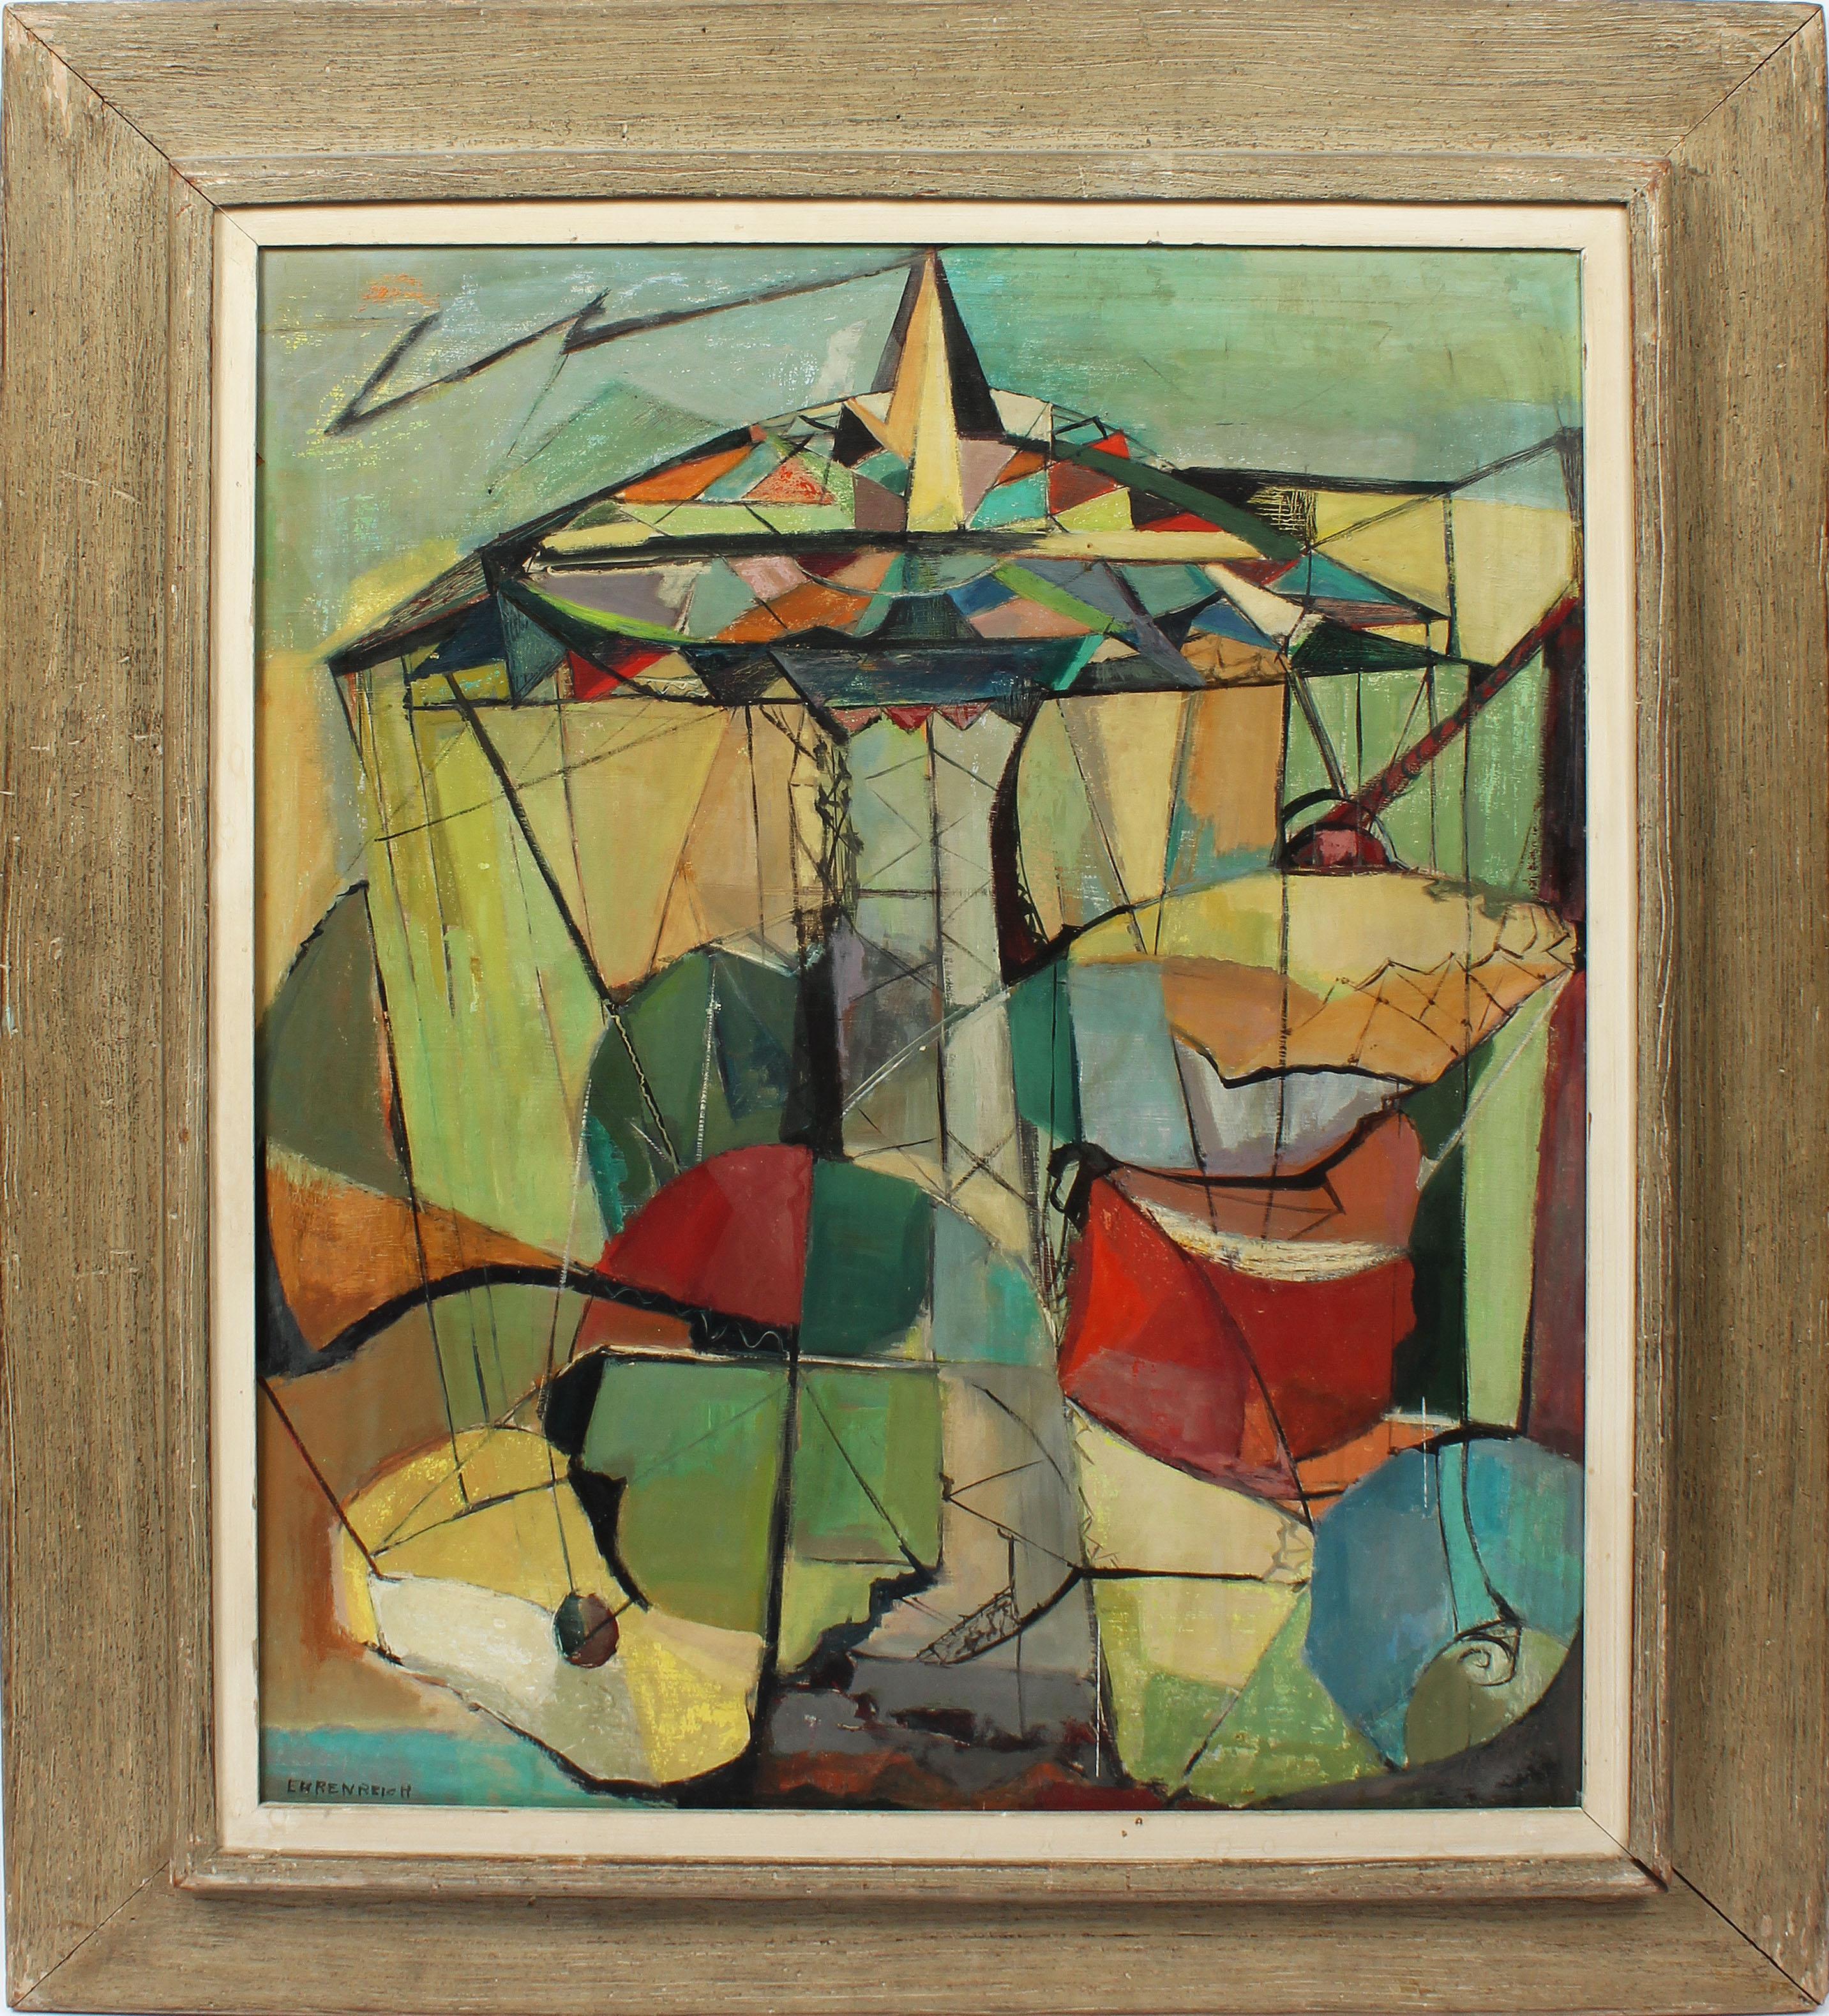 Emma Ehrenreich Landscape Painting - Antique American Modernist Abstract Cubist NYC Landscape Signed Oil Painting